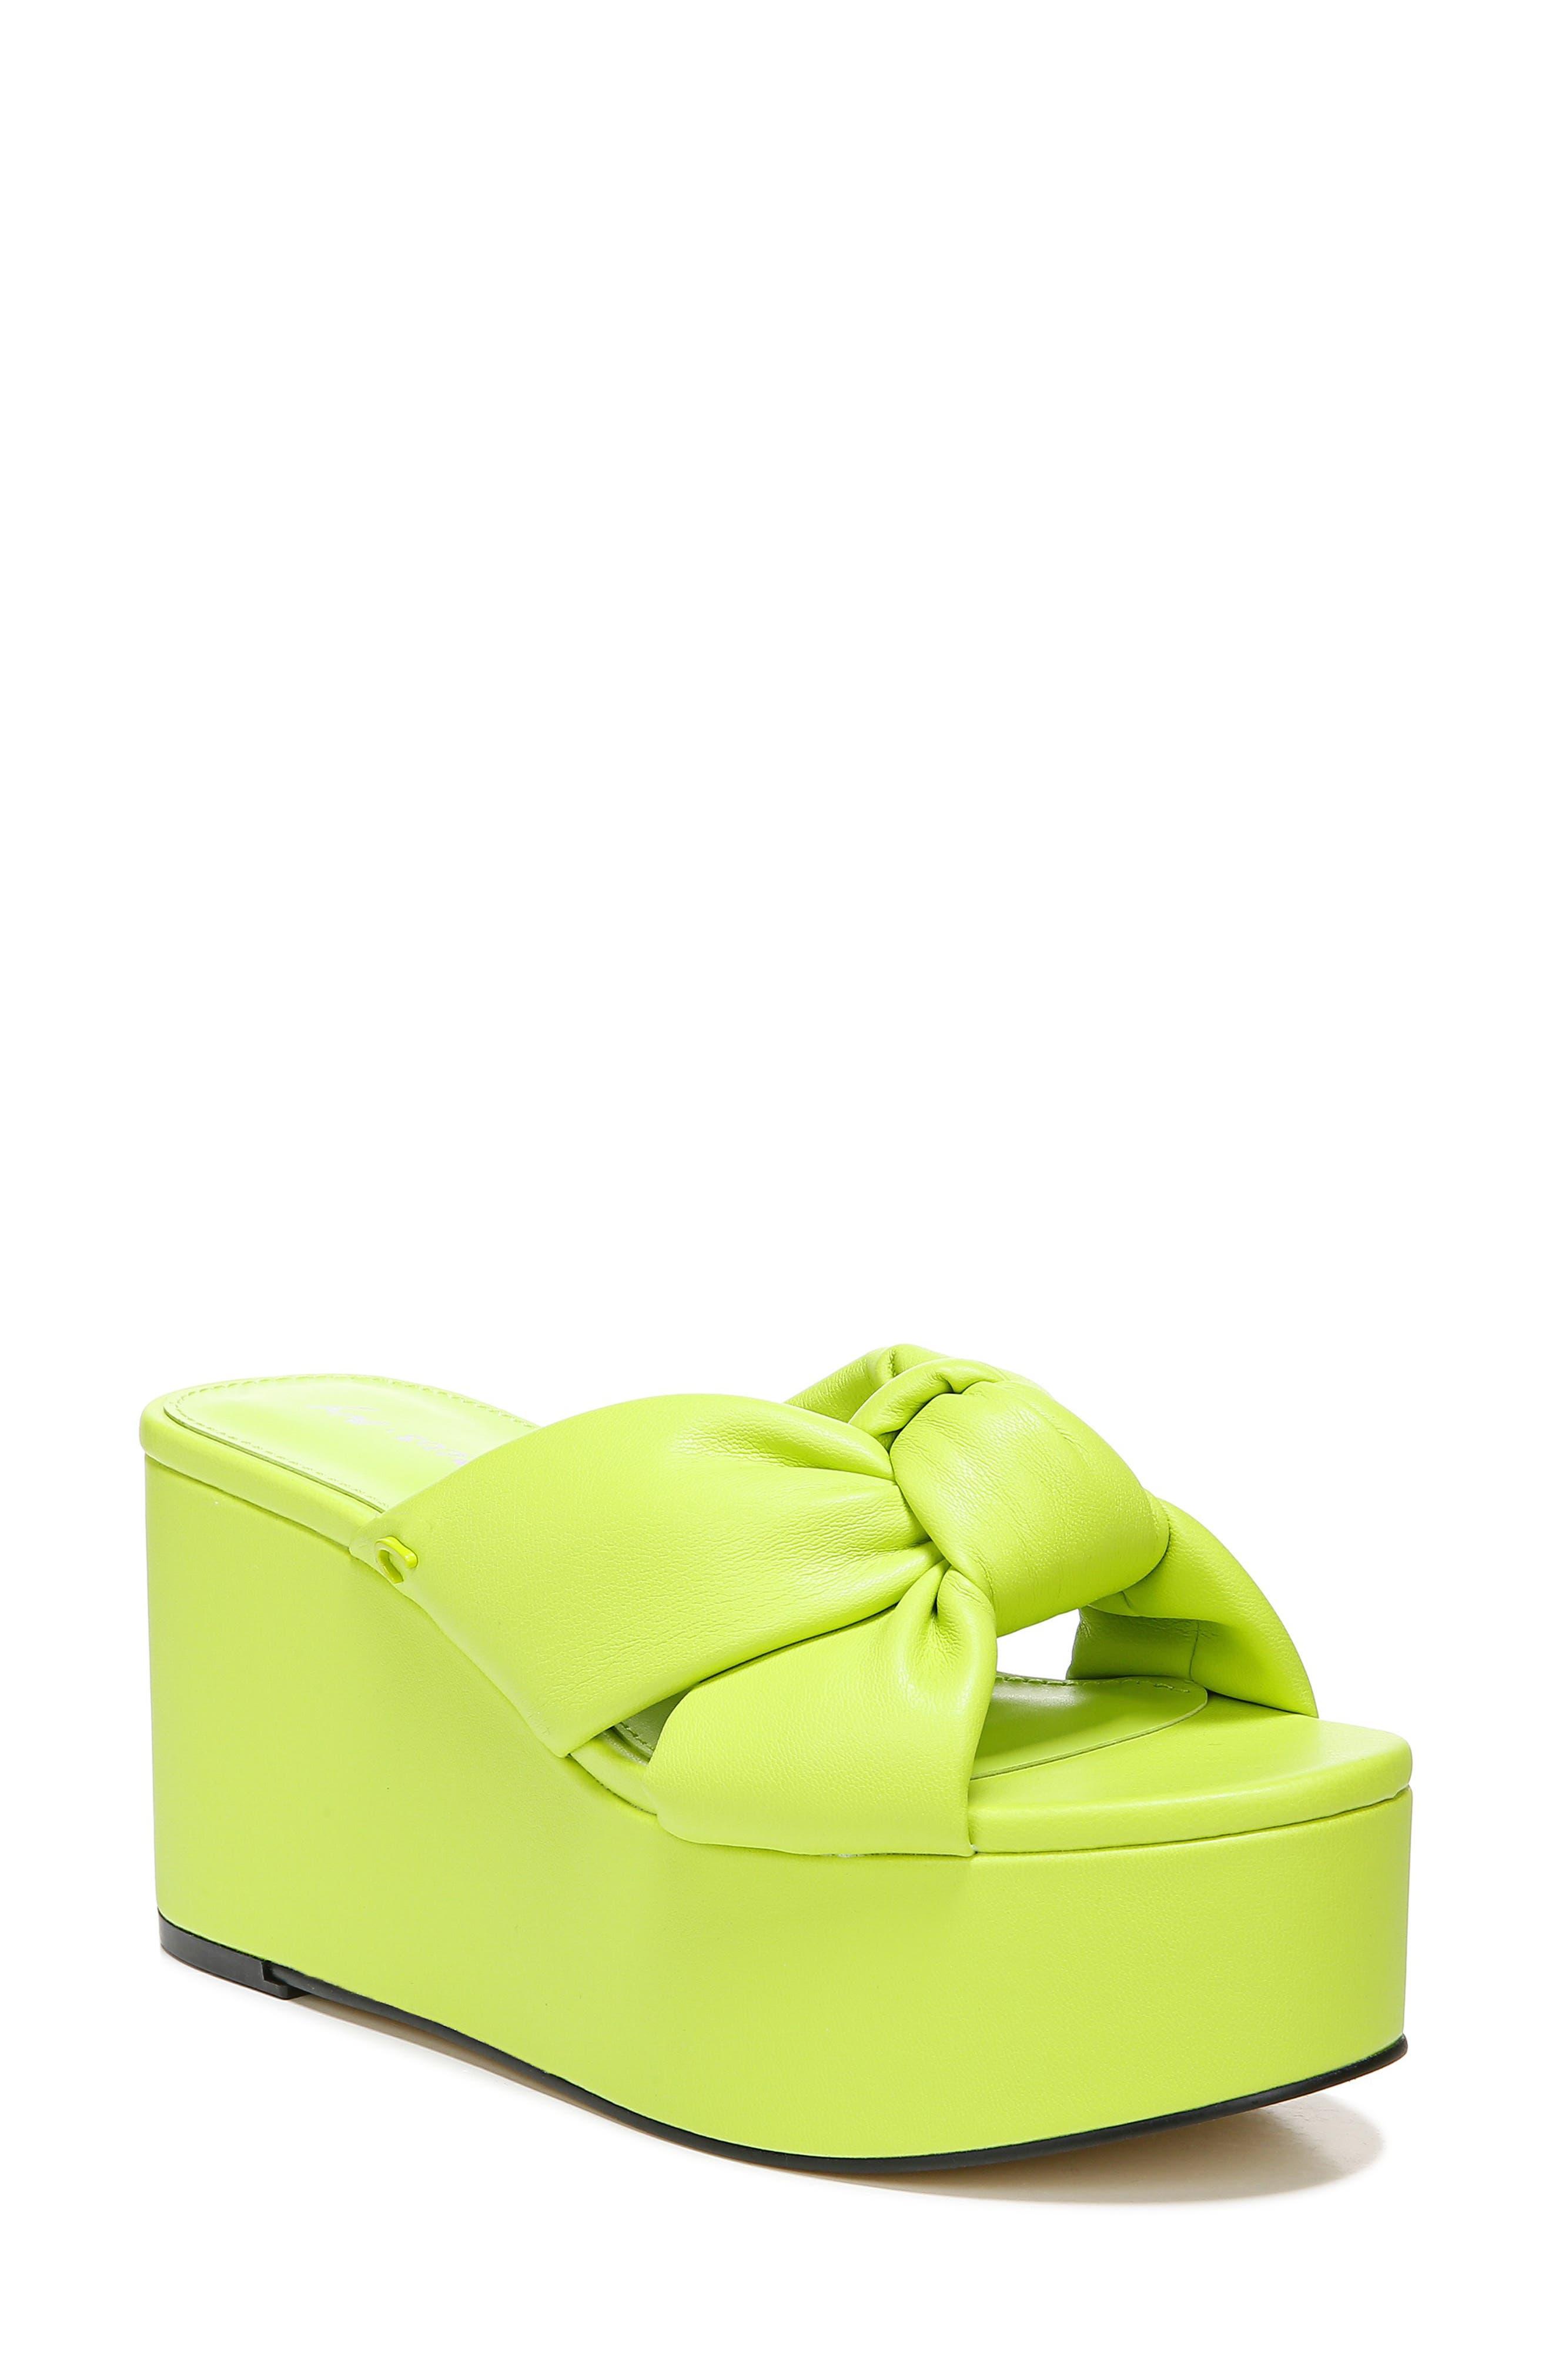 Circus by Sam Edelman Grady Platform Wedge Sandal In Wasabi At Nordstrom  Rack in Yellow | Lyst